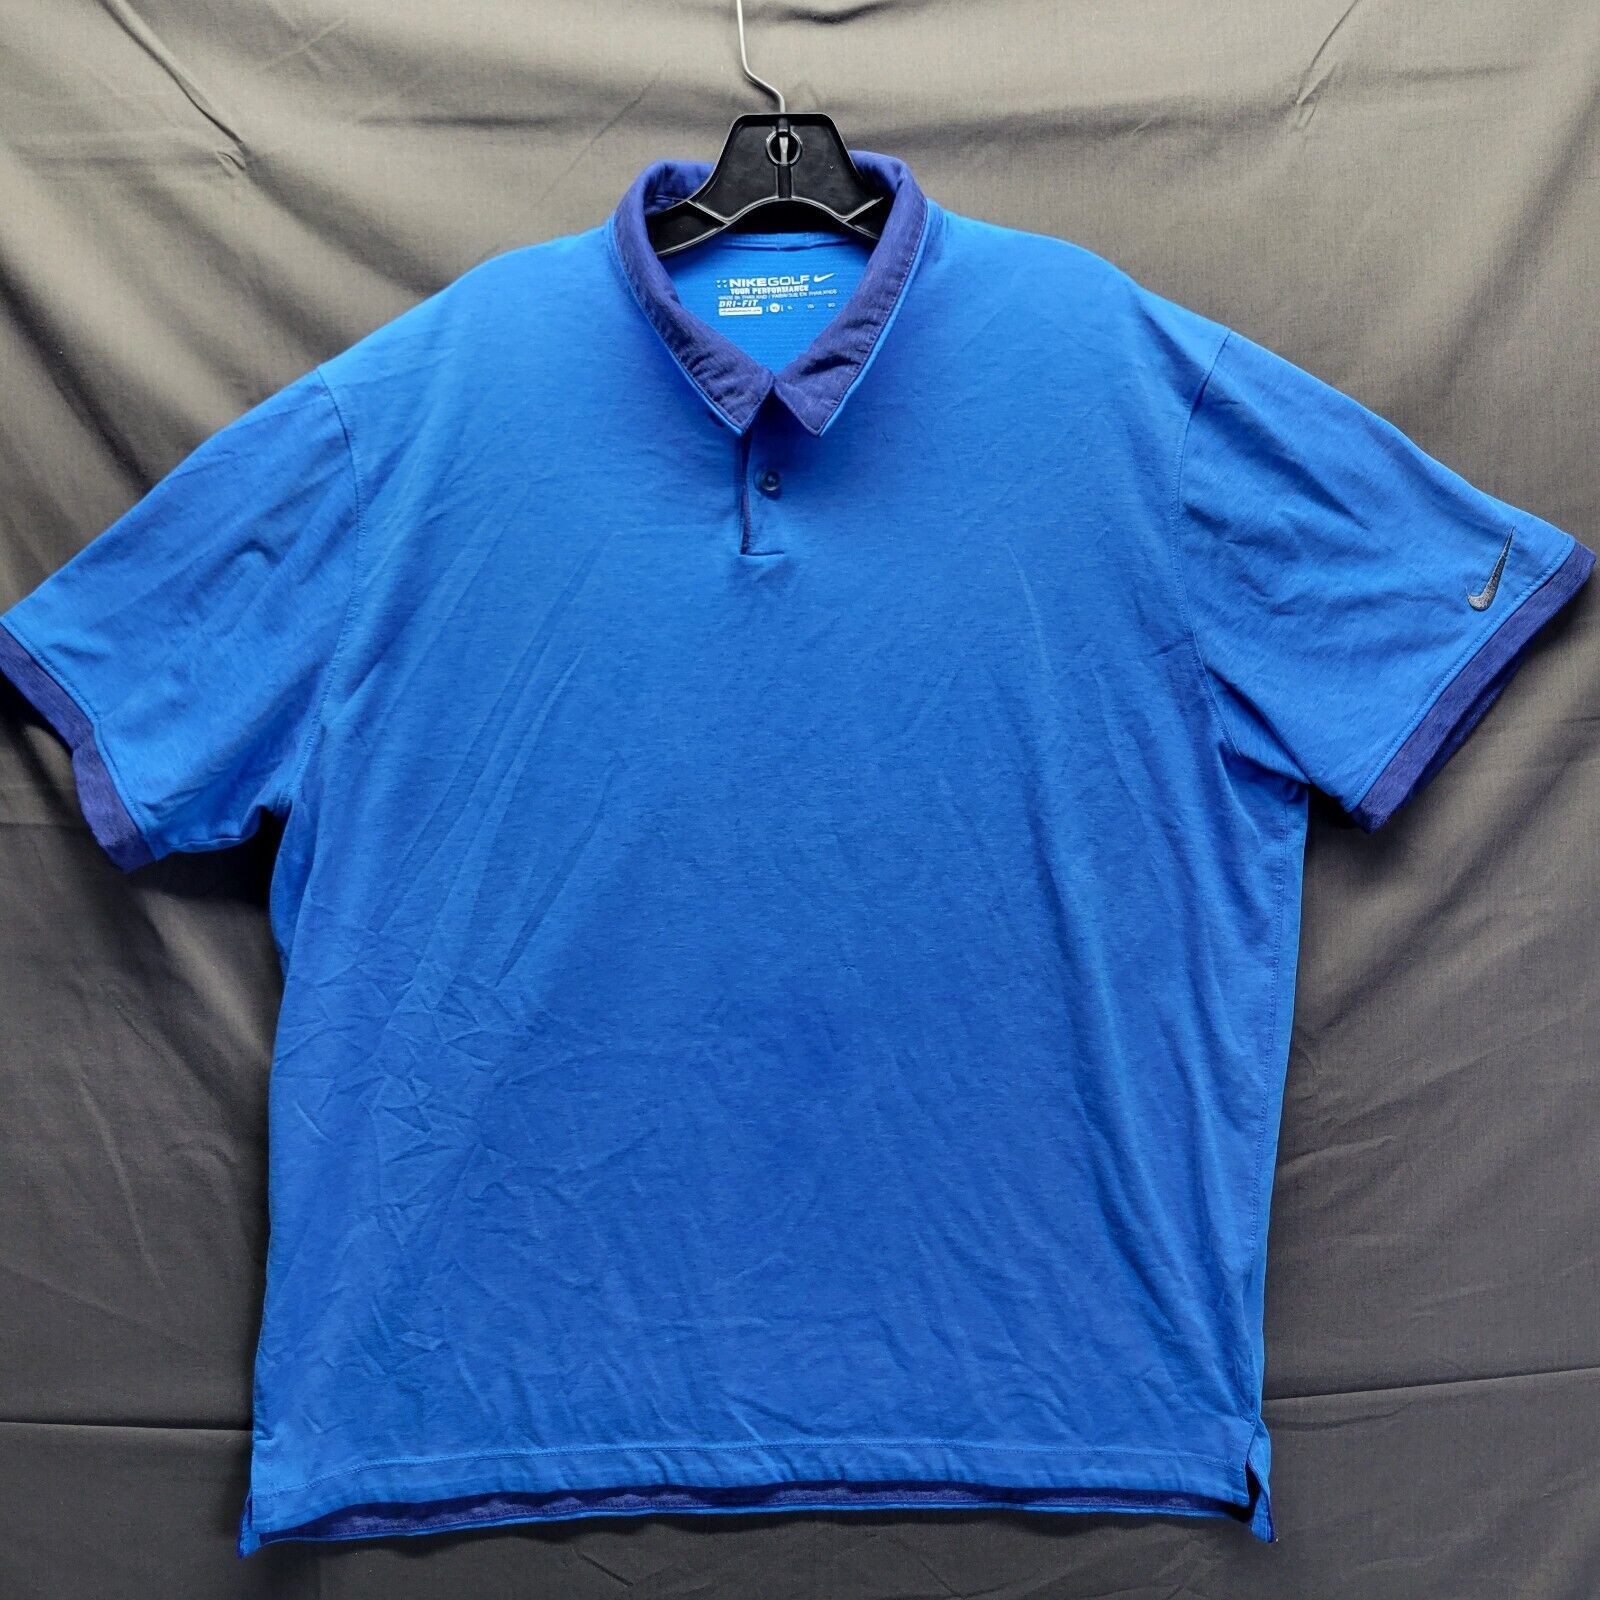 Primary image for NIKE Golf Dri Fit Blue Polo Shirt Men’s - Button Collar XL